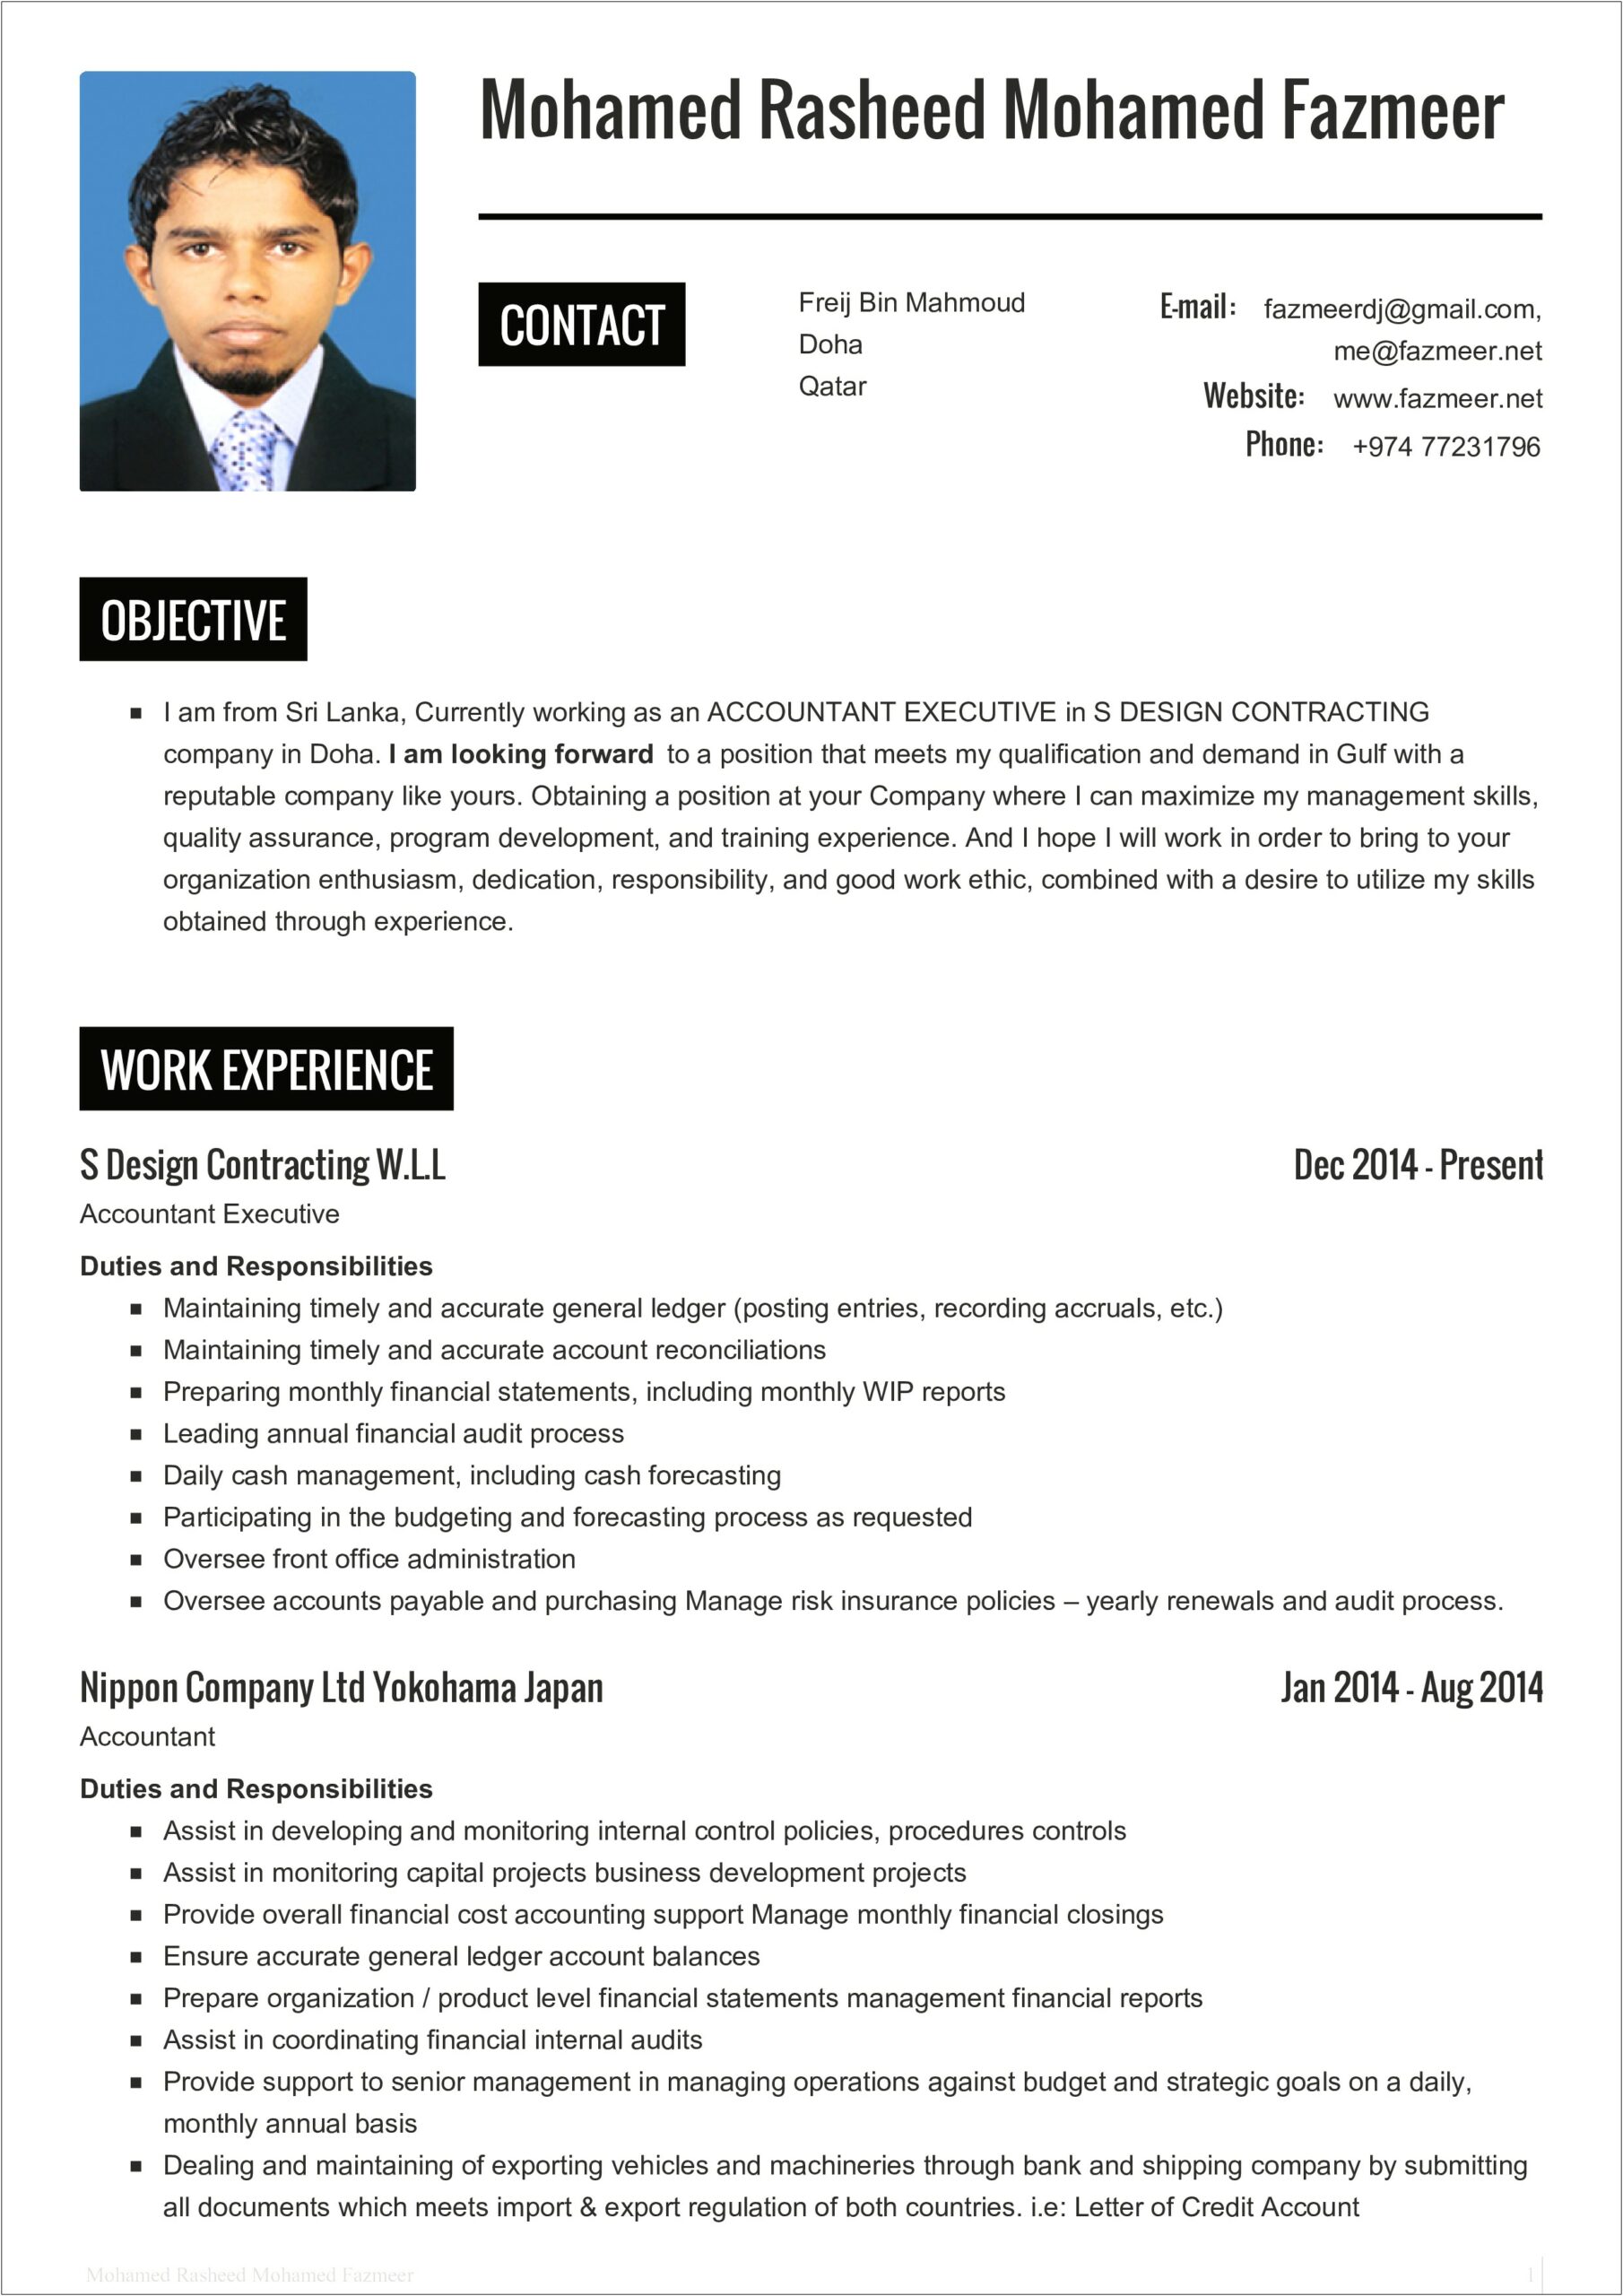 Construction Resume Sample No Experience